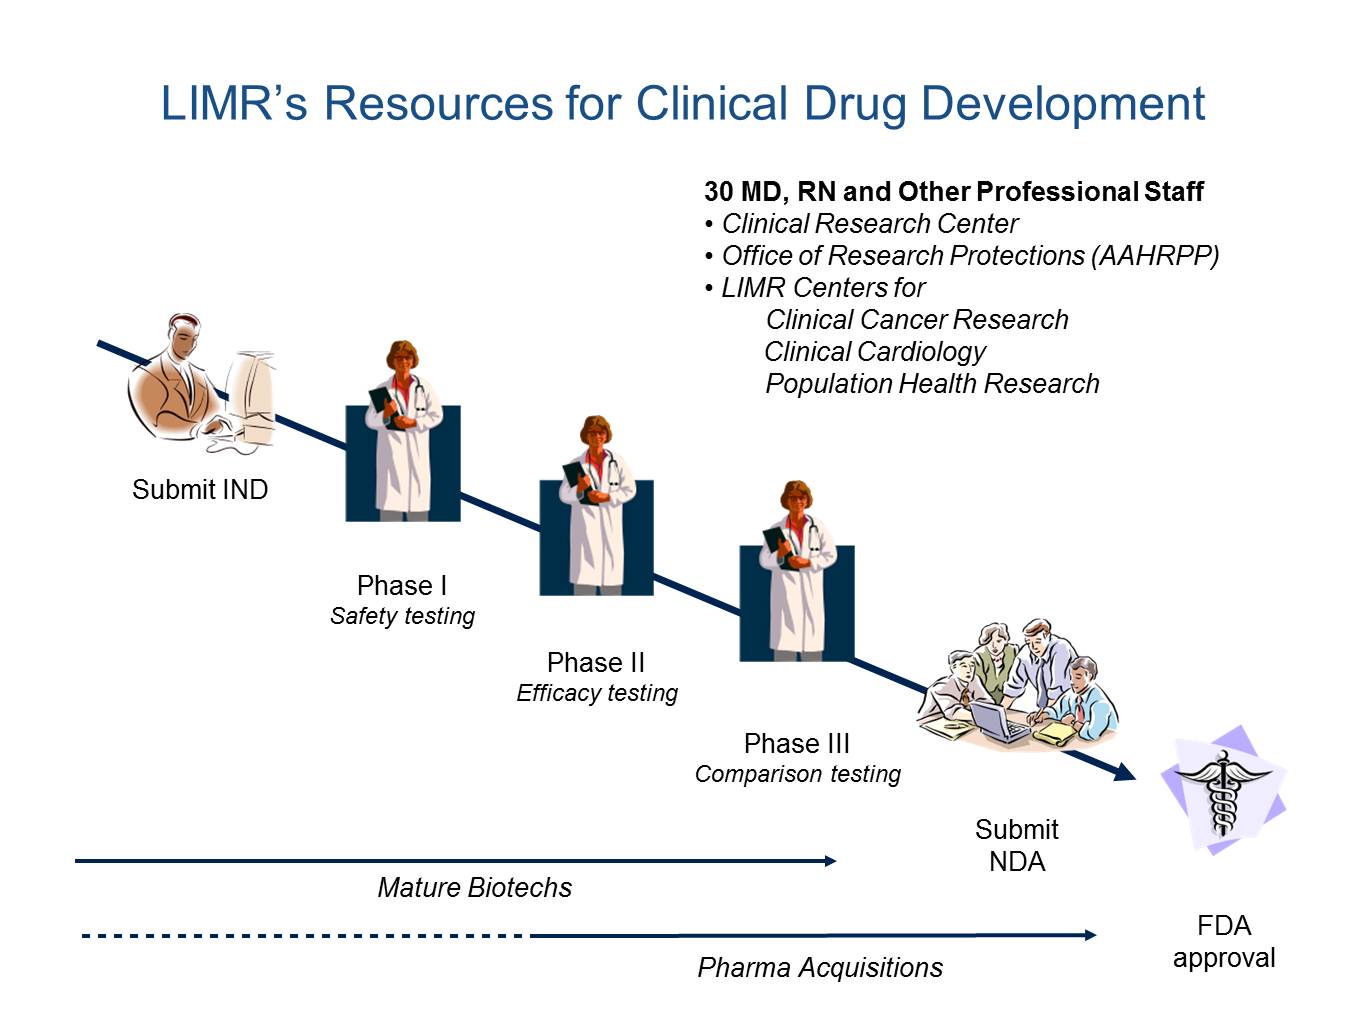 LIMR's resources for clinical drug development